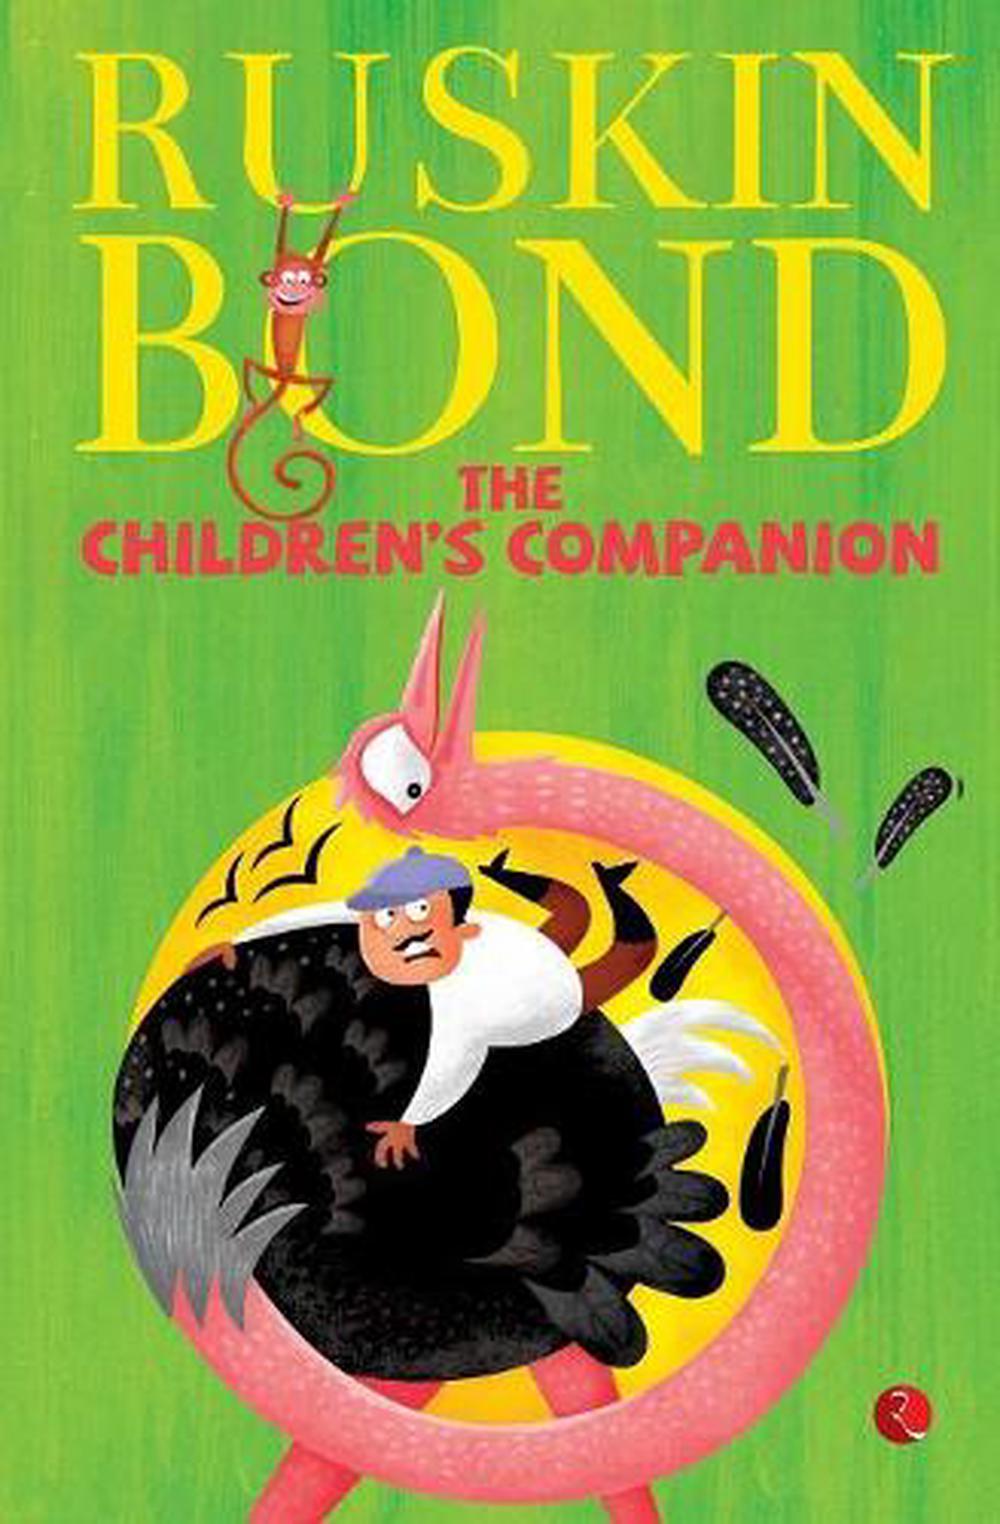 book review of children's omnibus by ruskin bond